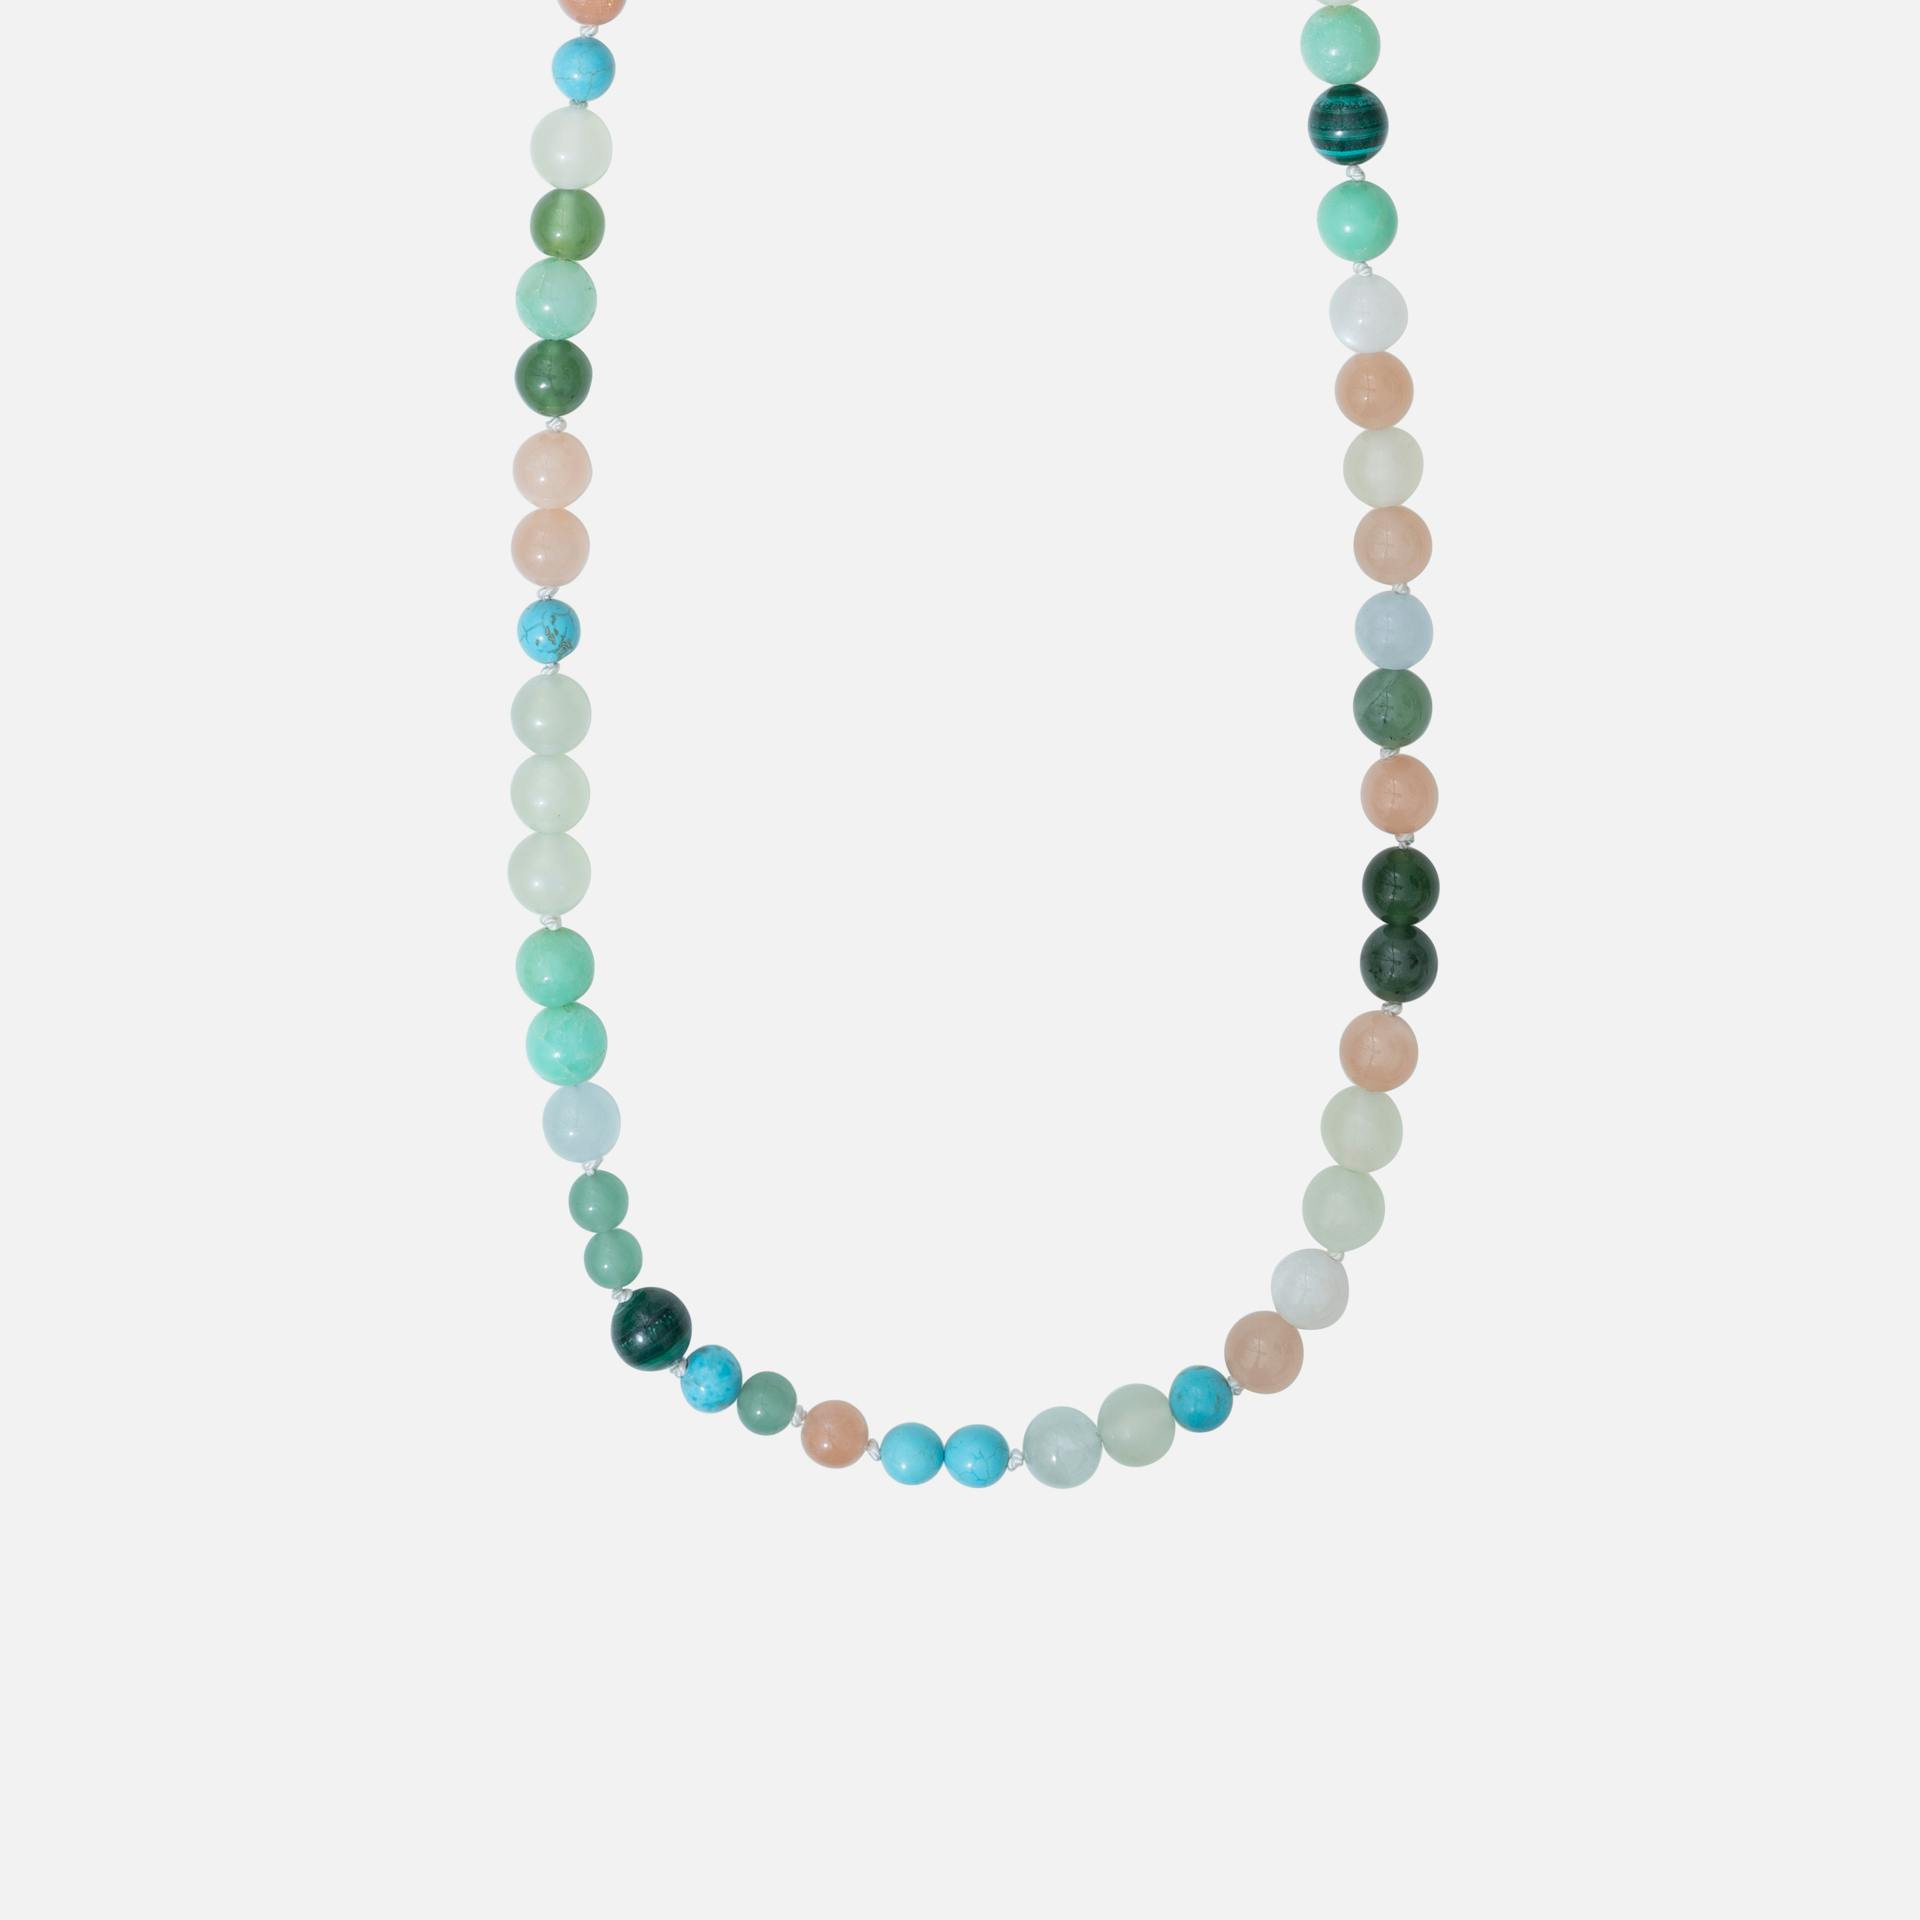 Bead collier without lock Mixed stones

